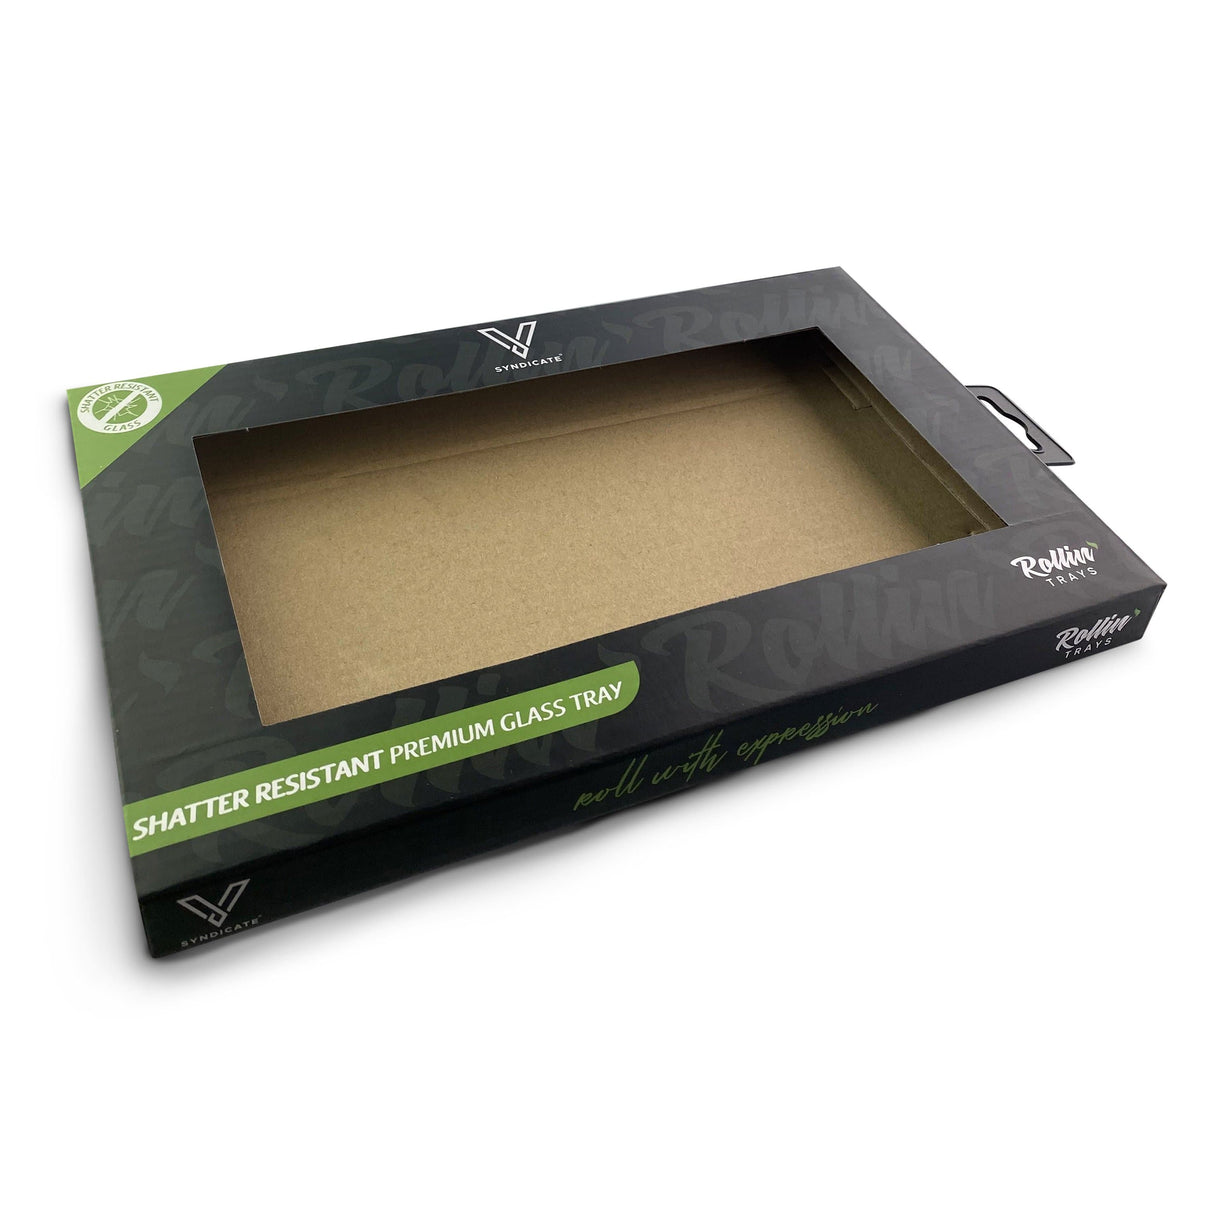 V Syndicate Dirty Ridin' Glass Tray - Medium Size, Shatter Resistant, Angled View